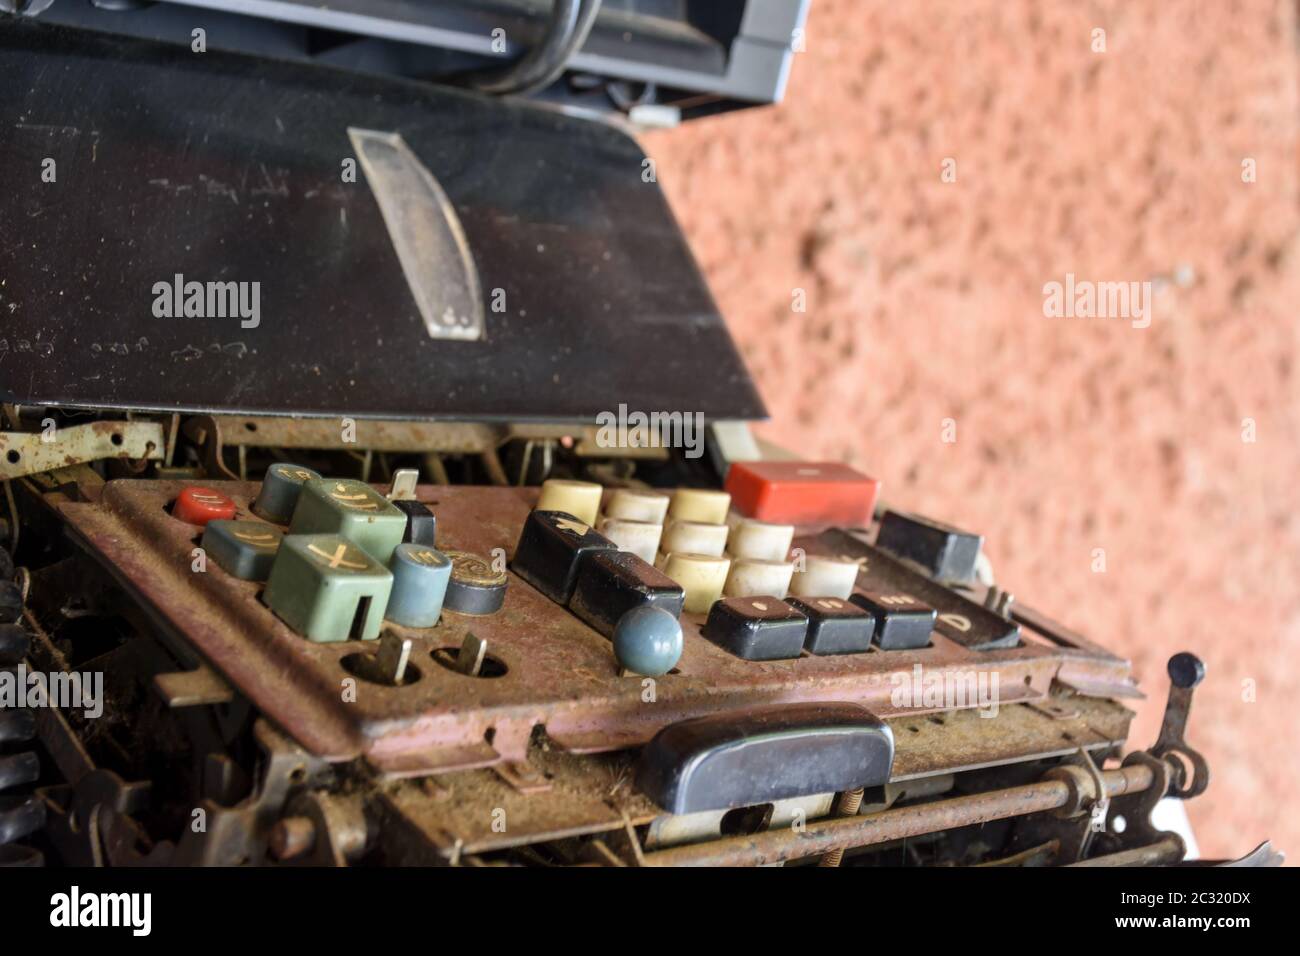 Old and damaged mechanical calculating machine Stock Photo